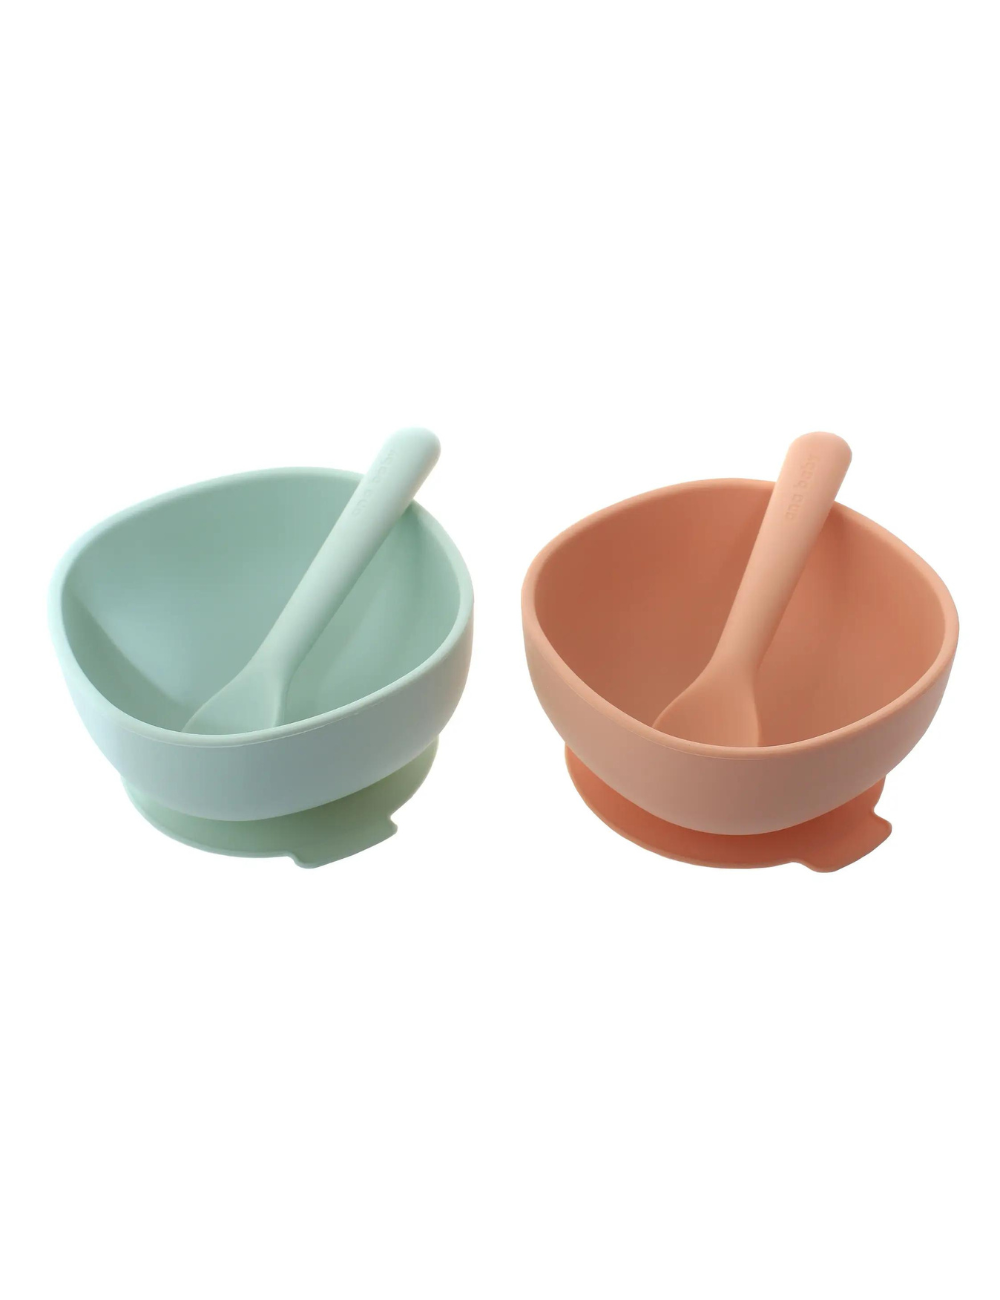 2 Pack Silicone Suction Bowl and Spoon in Kraft Paper Box